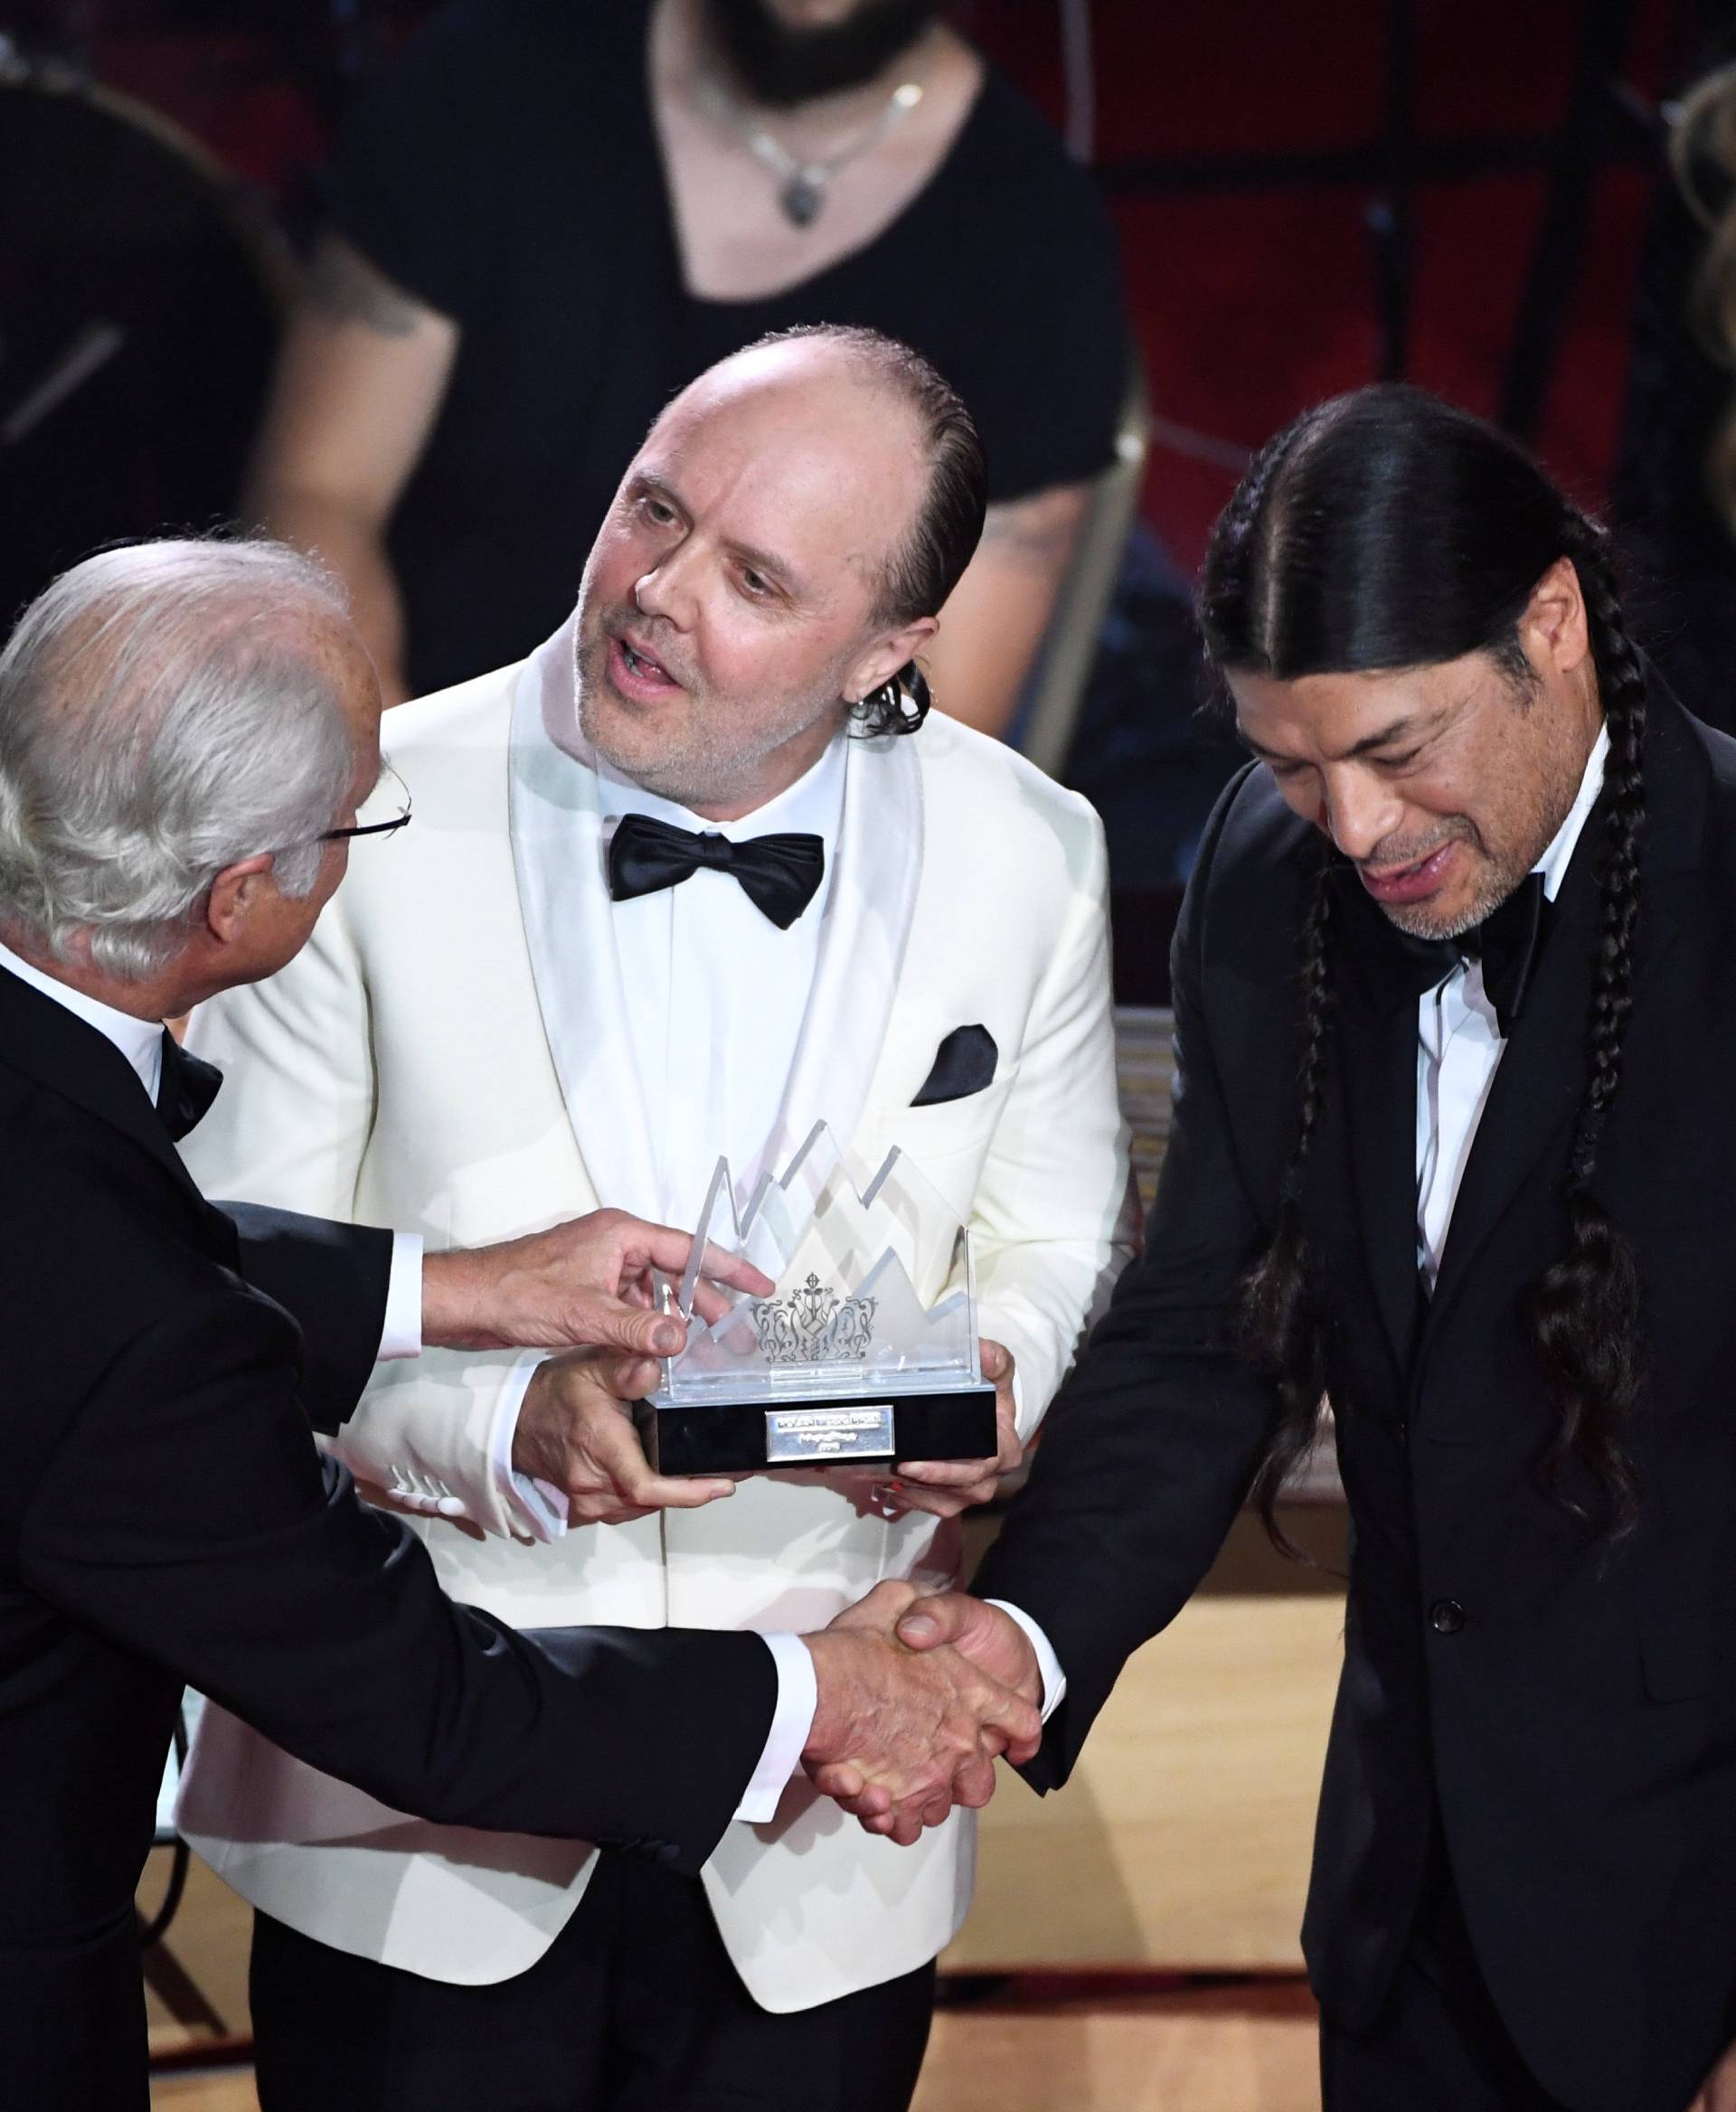 King Carl Gustaf of Sweden gives out the Polar Music Prize to Lars Ulric and Robert Trujillo in Metallica during an award cermony at Grand Hotel in Stockholm